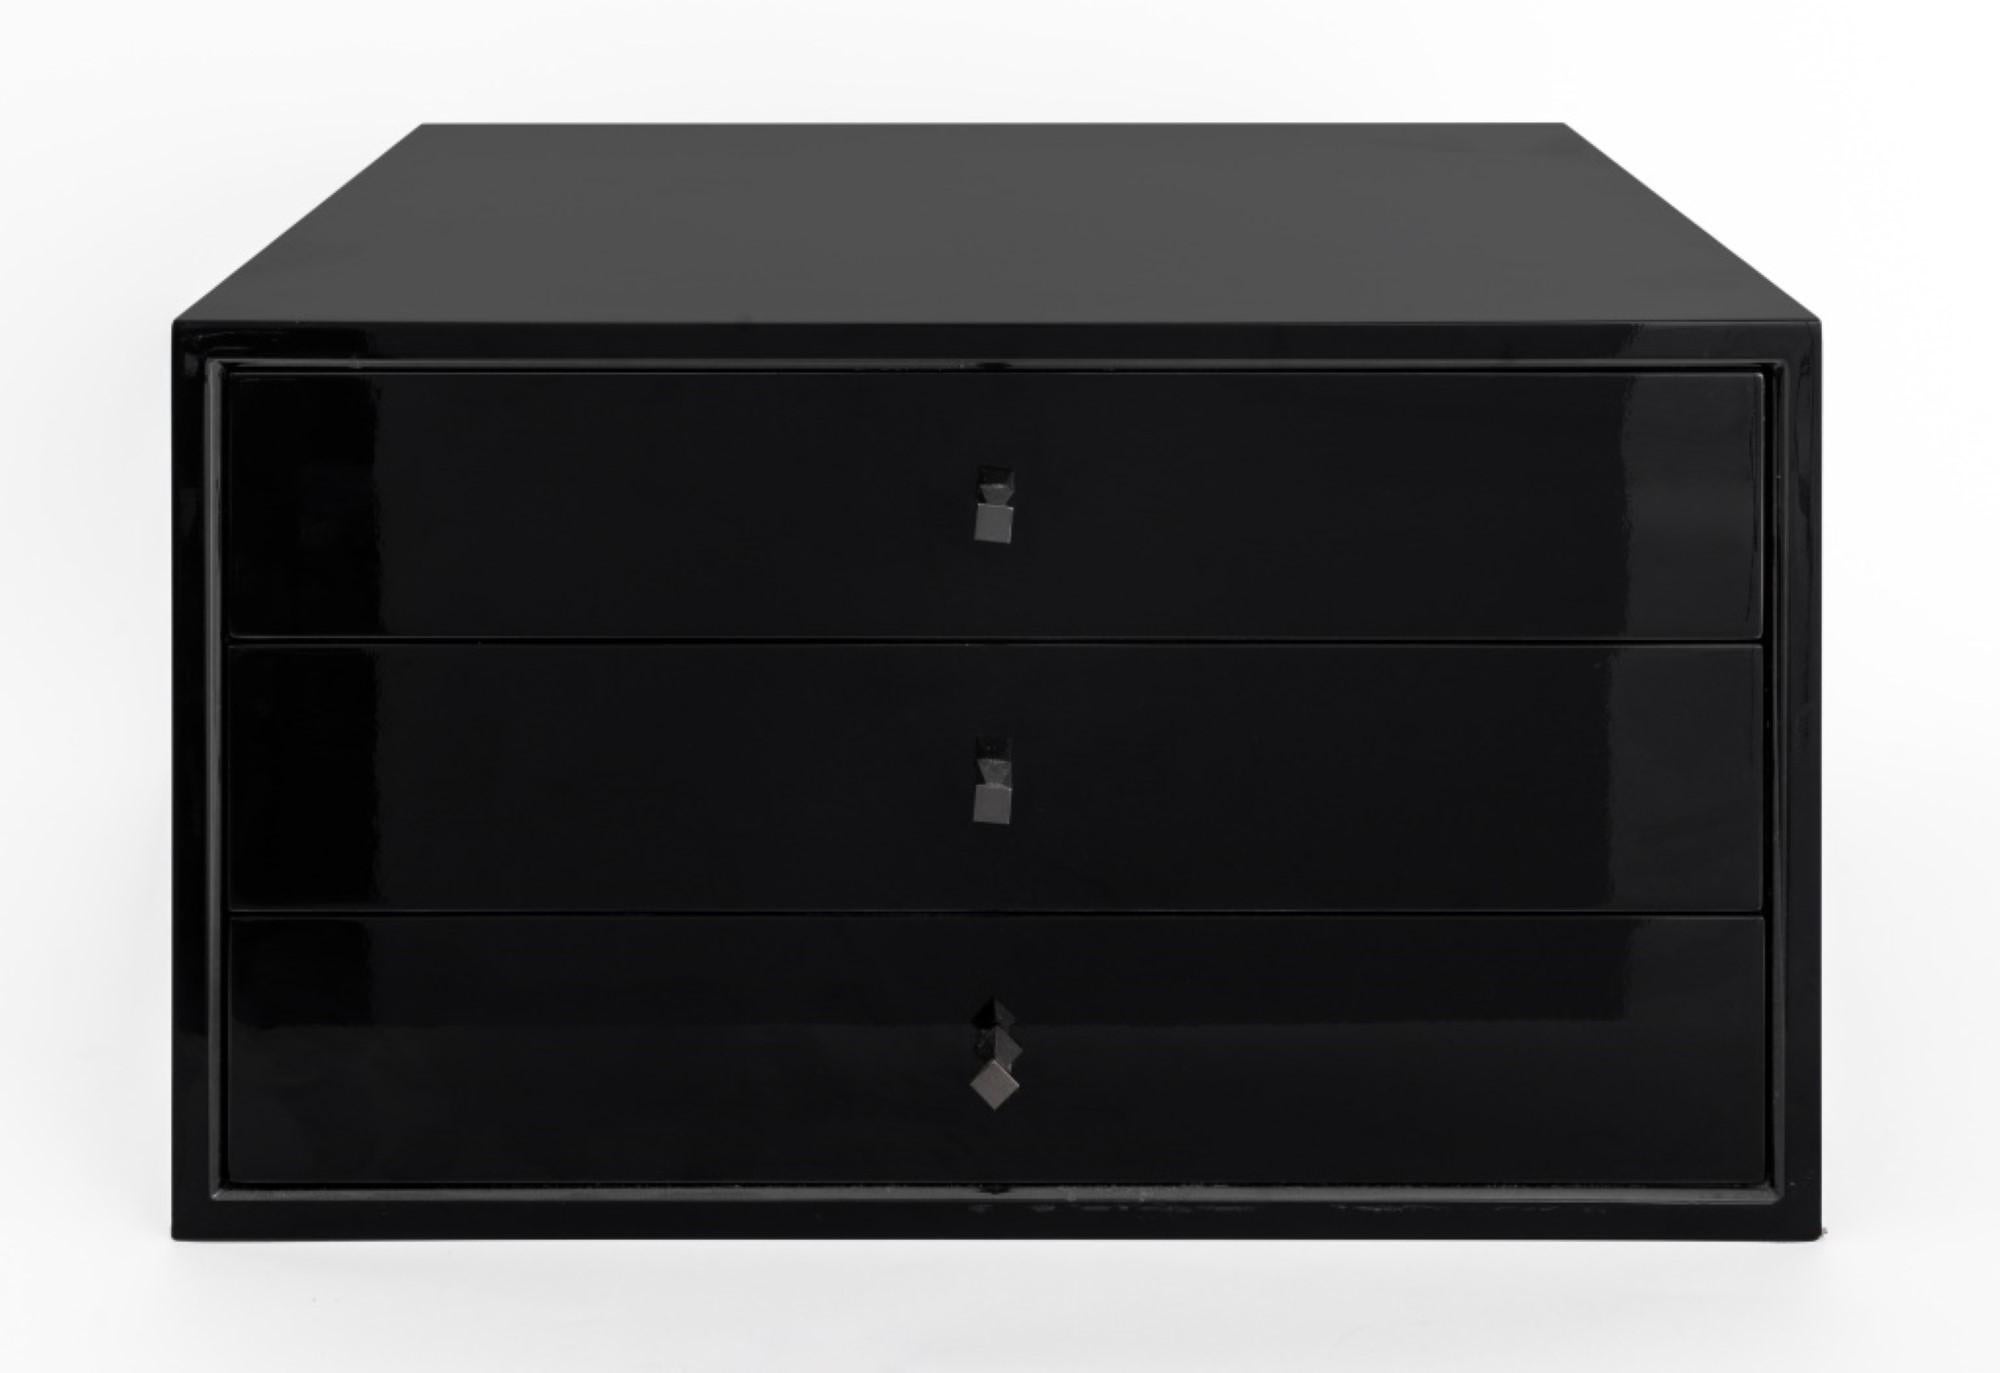  Calvin Klein Curator Collection black lacquered three-drawer side table or storage chest. Here are the specifications:

Collection: Calvin Klein Curator Collection
Color: Black lacquered
Type: Three-drawer side table/storage chest

Dealer: S138XX